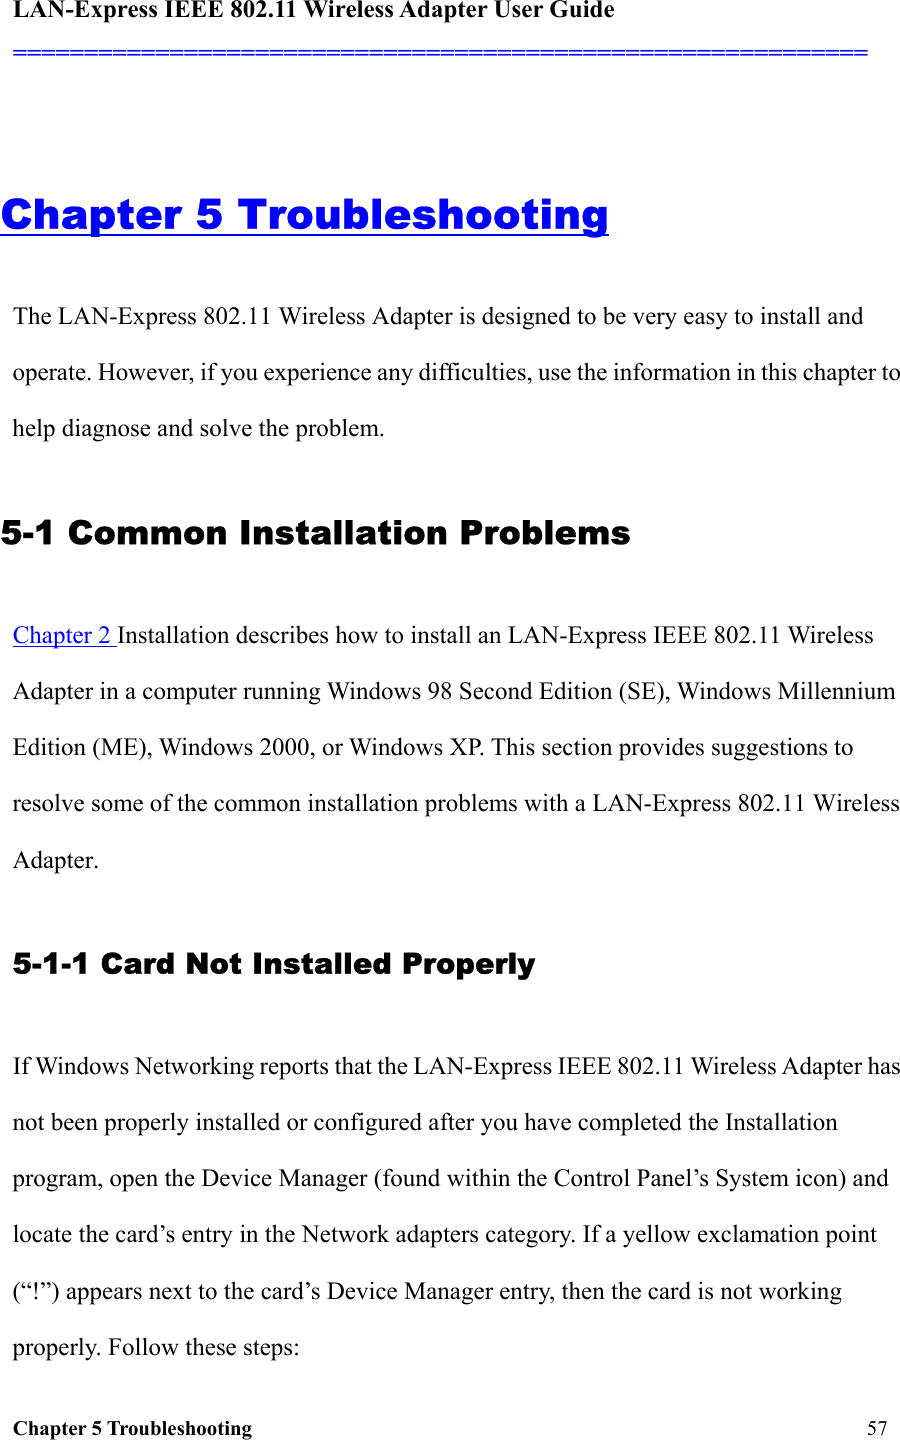 LAN-Express IEEE 802.11 Wireless Adapter User Guide ============================================================  Chapter 5 Troubleshooting   57                                                   Chapter 5 Troubleshooting The LAN-Express 802.11 Wireless Adapter is designed to be very easy to install and operate. However, if you experience any difficulties, use the information in this chapter to help diagnose and solve the problem.  5-1 Common Installation Problems Chapter 2 Installation describes how to install an LAN-Express IEEE 802.11 Wireless Adapter in a computer running Windows 98 Second Edition (SE), Windows Millennium Edition (ME), Windows 2000, or Windows XP. This section provides suggestions to resolve some of the common installation problems with a LAN-Express 802.11 Wireless Adapter. 5-1-1 Card Not Installed Properly If Windows Networking reports that the LAN-Express IEEE 802.11 Wireless Adapter has not been properly installed or configured after you have completed the Installation program, open the Device Manager (found within the Control Panel’s System icon) and locate the card’s entry in the Network adapters category. If a yellow exclamation point (“!”) appears next to the card’s Device Manager entry, then the card is not working properly. Follow these steps: 